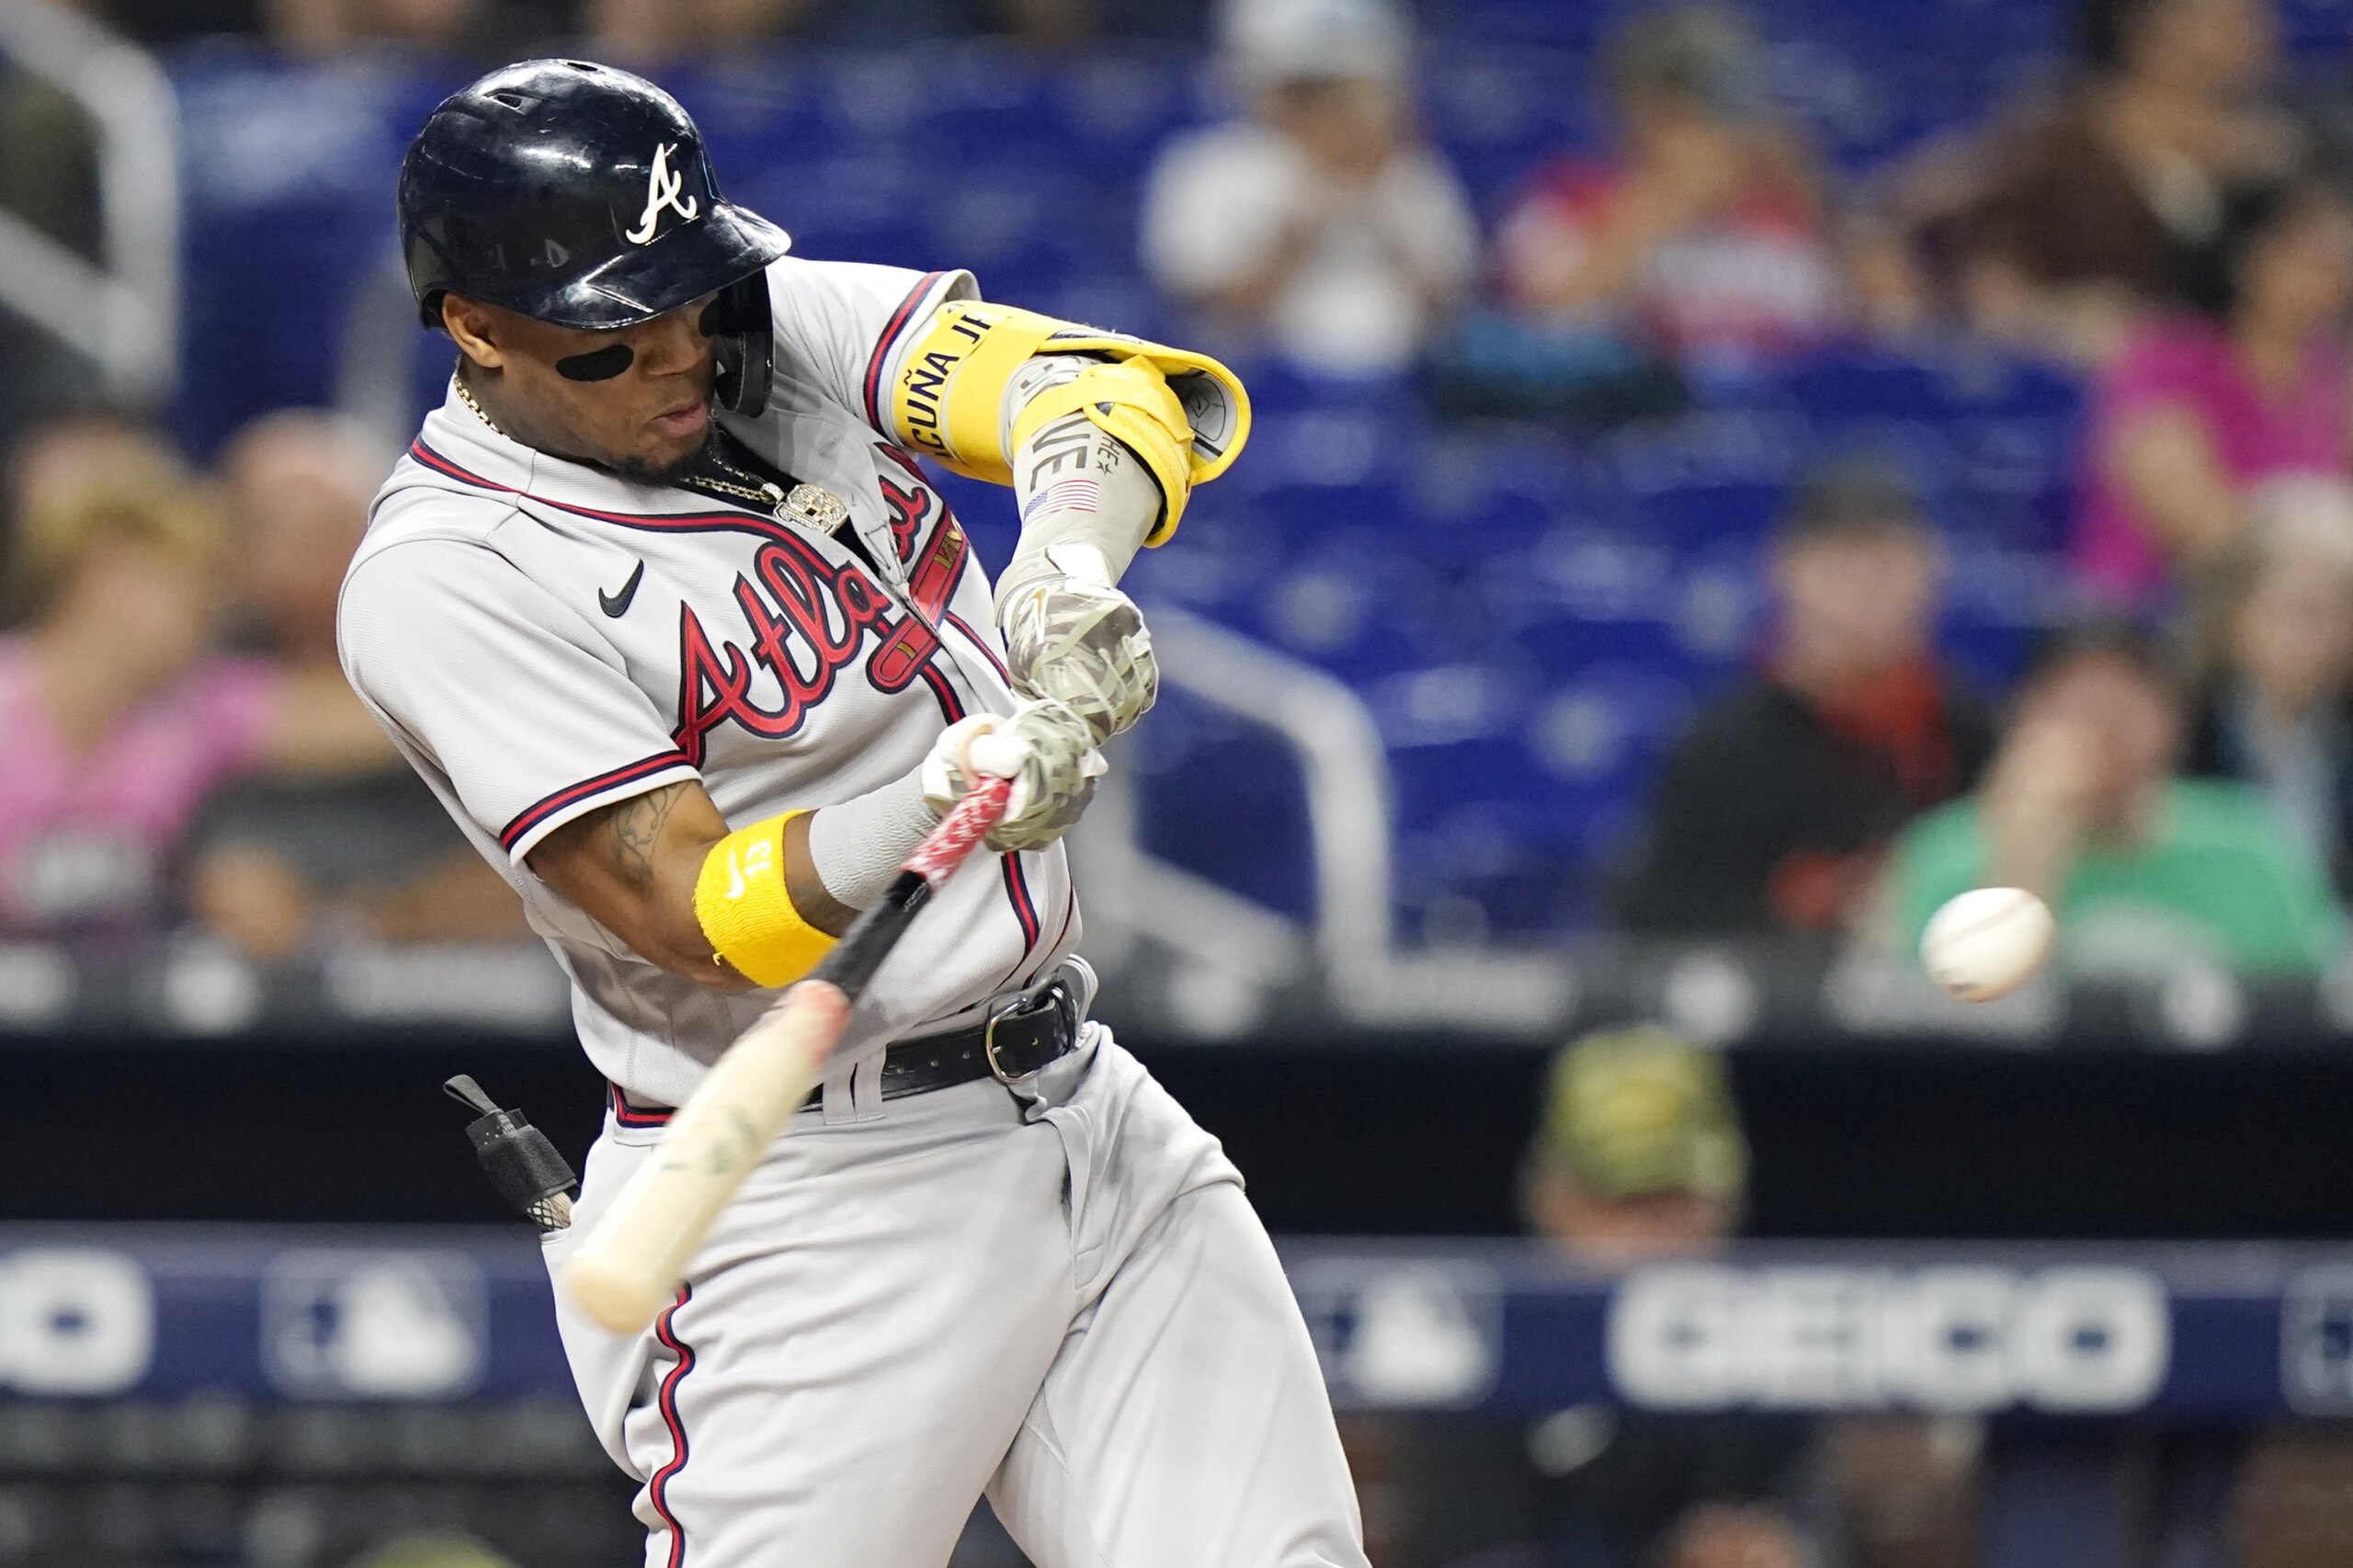 Acuña’s 1st game in Miami since knee injury, leads Braves - WTOP News